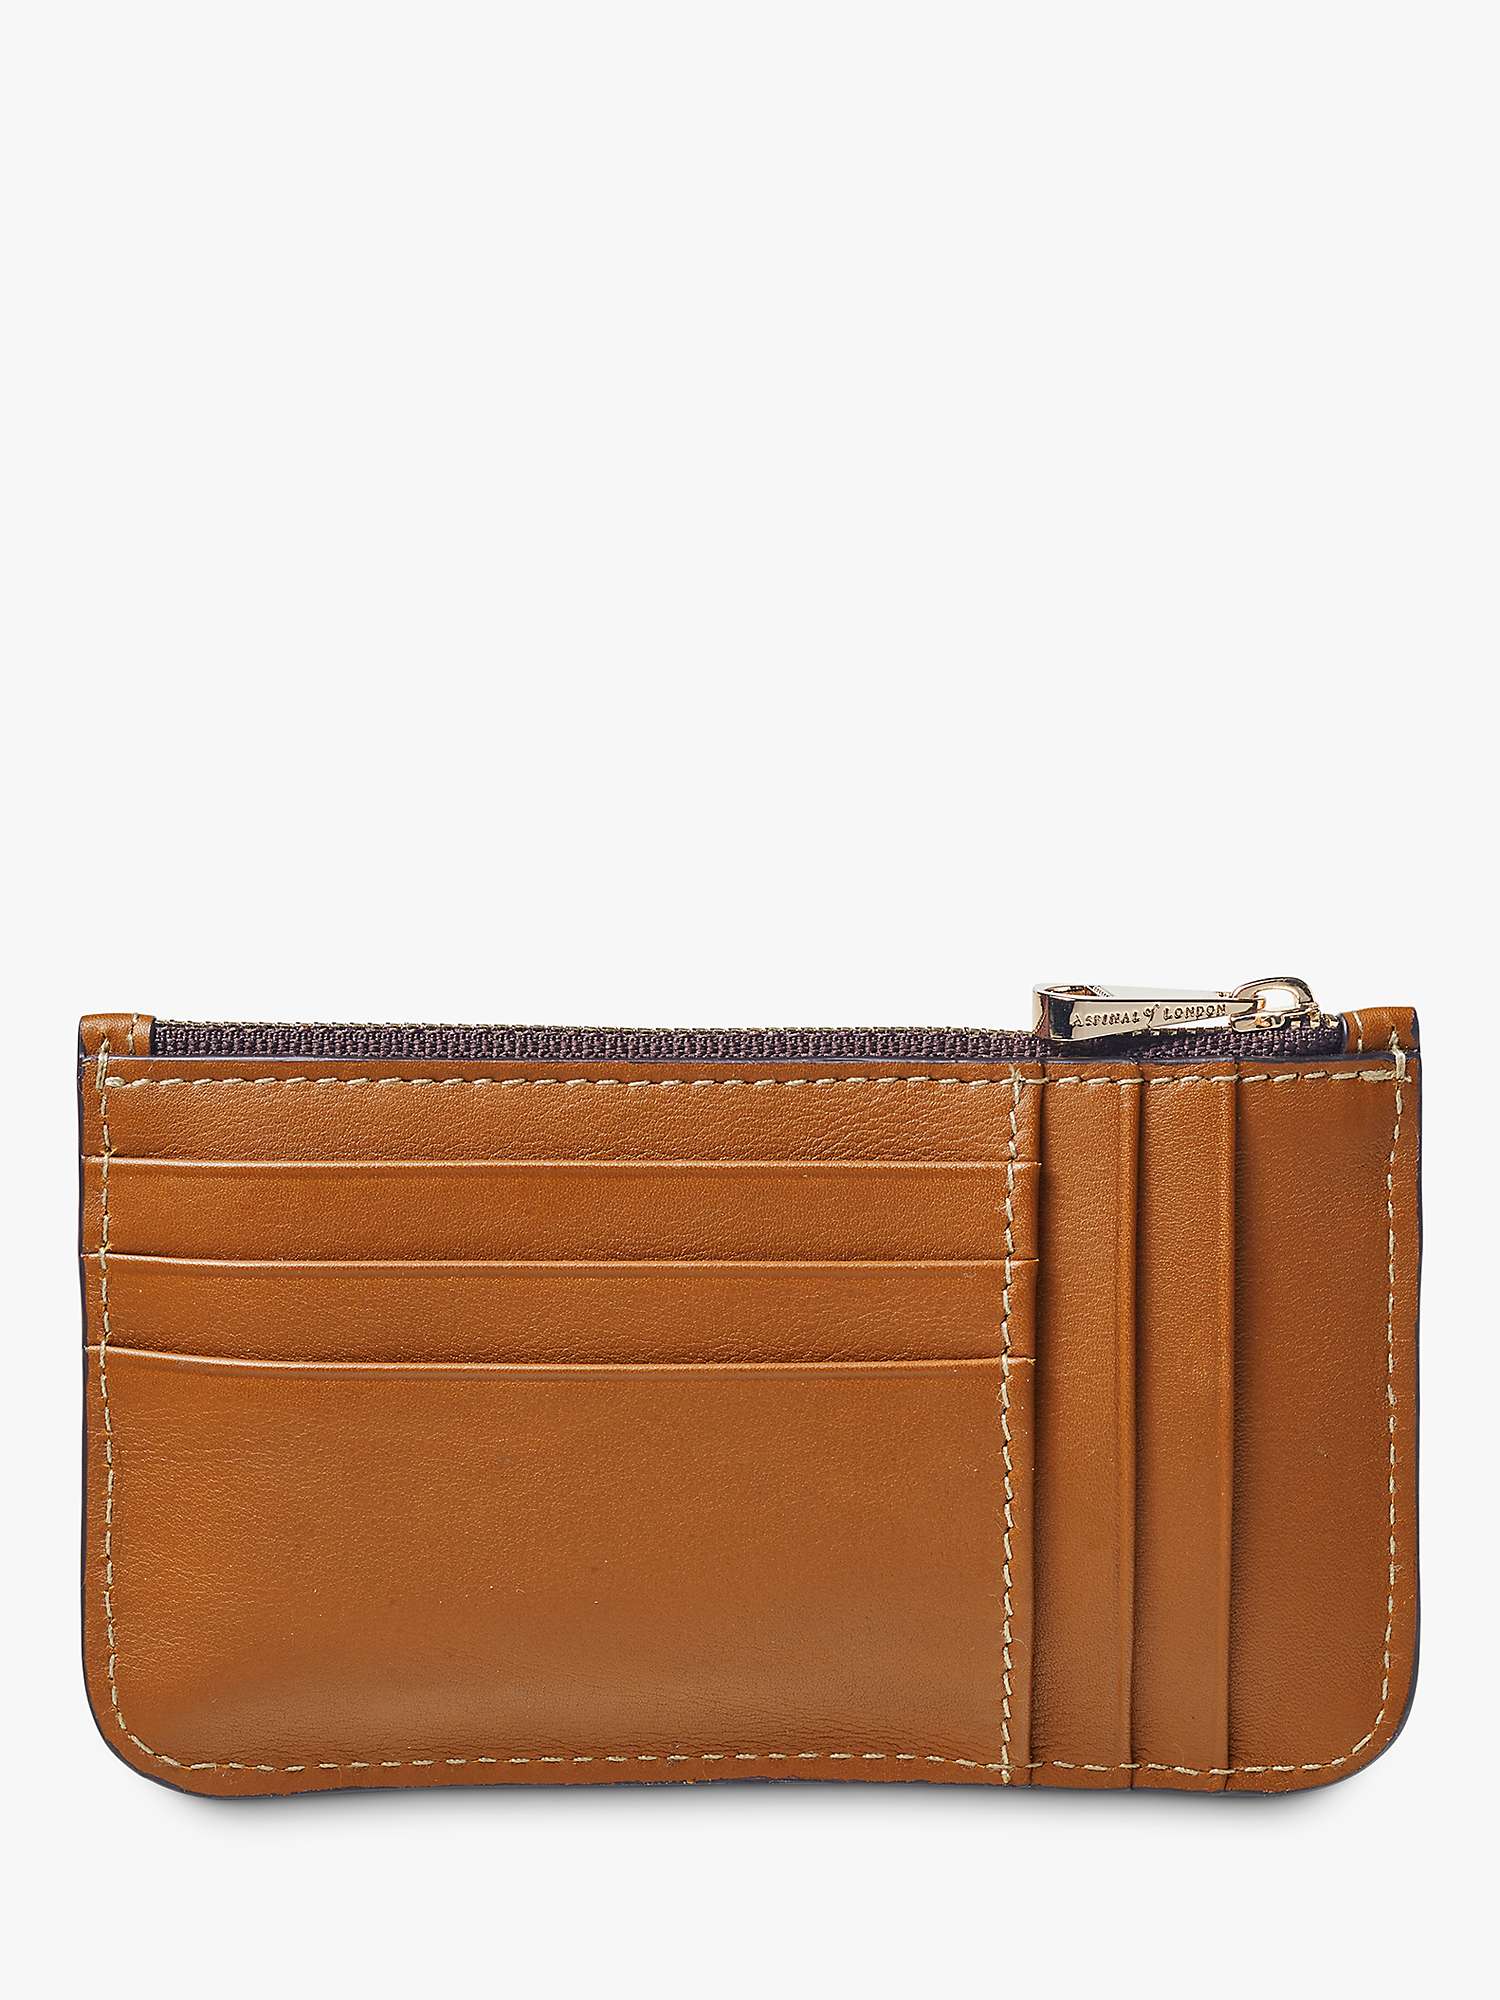 Buy Aspinal of London Ella Leather Card and Coin Holder, Tan Online at johnlewis.com